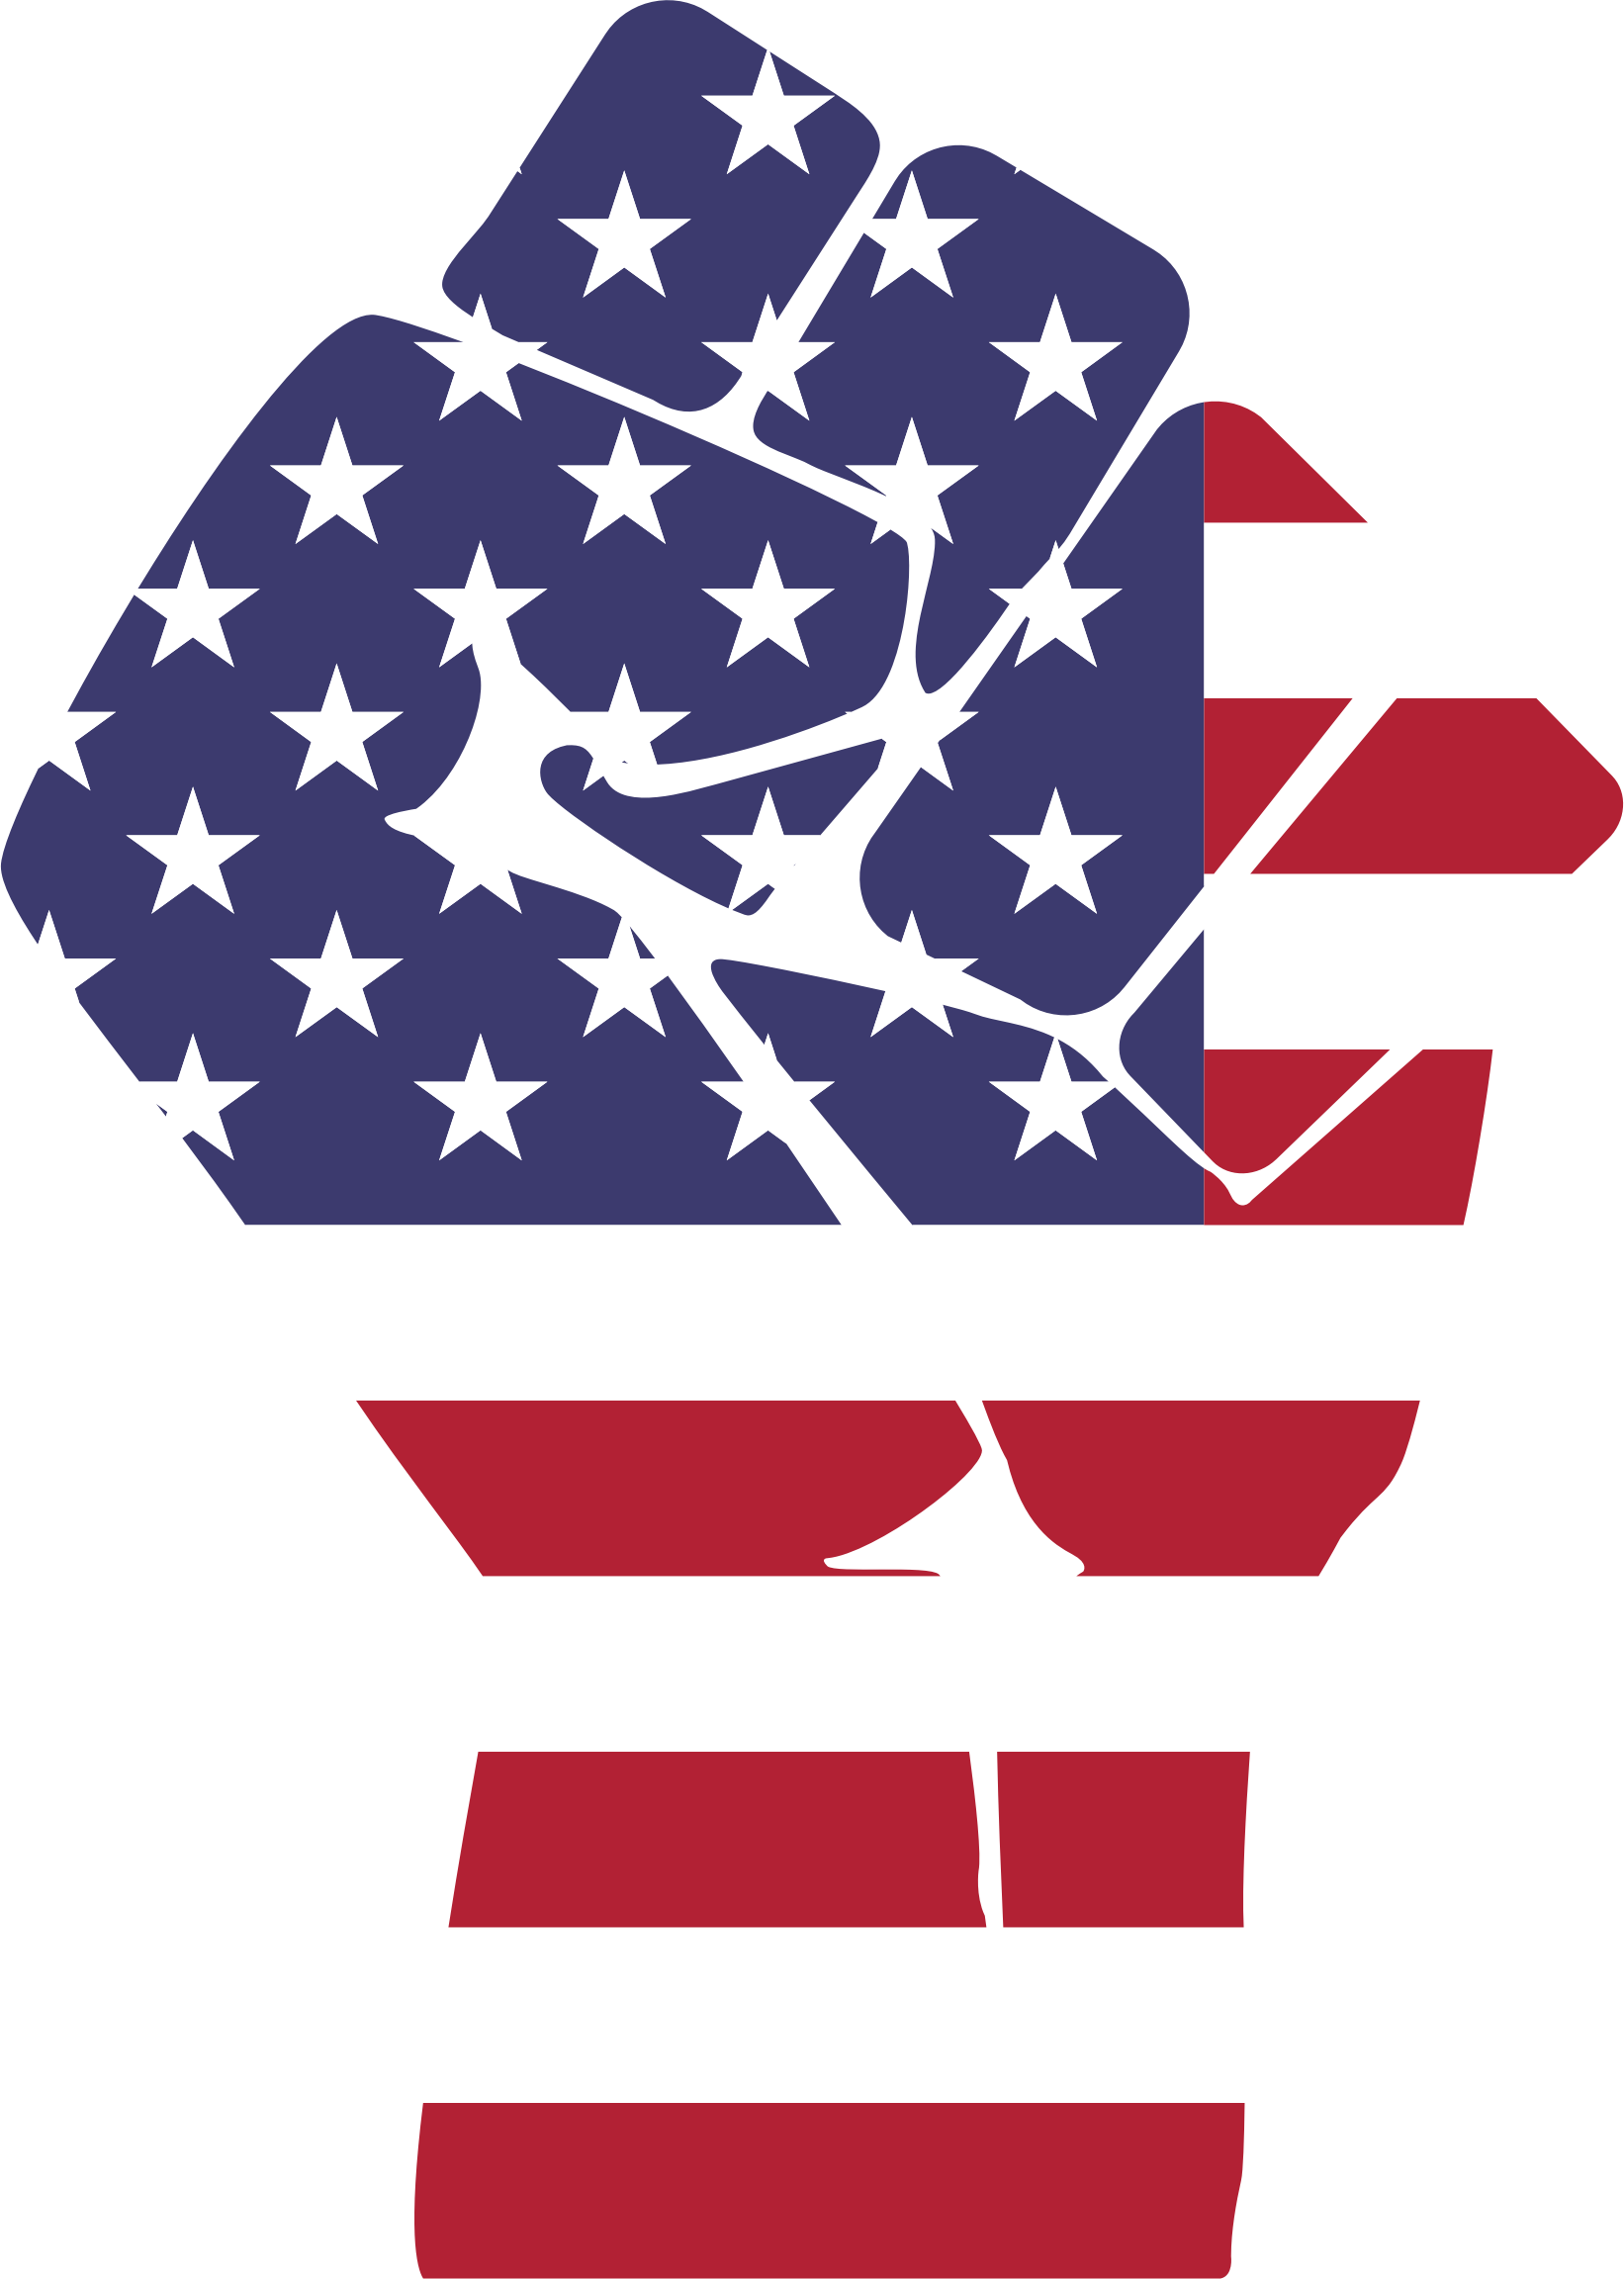 Fist clipart power. American pencil and in